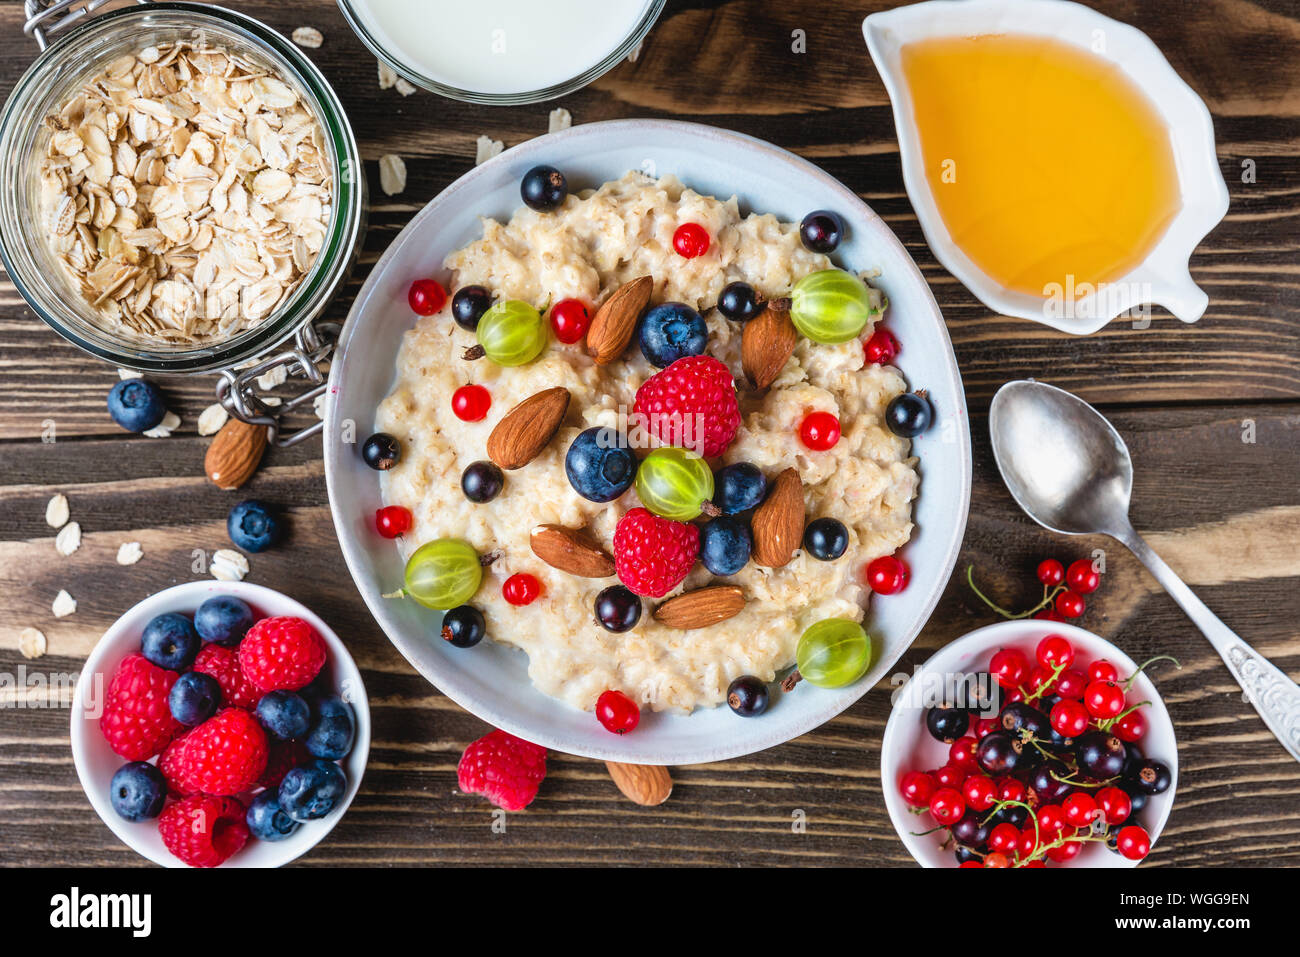 healthy breakfast. bowl of oatmeal porridge with berries, nuts, honey and glass of milk on rustic wooden table. top view Stock Photo